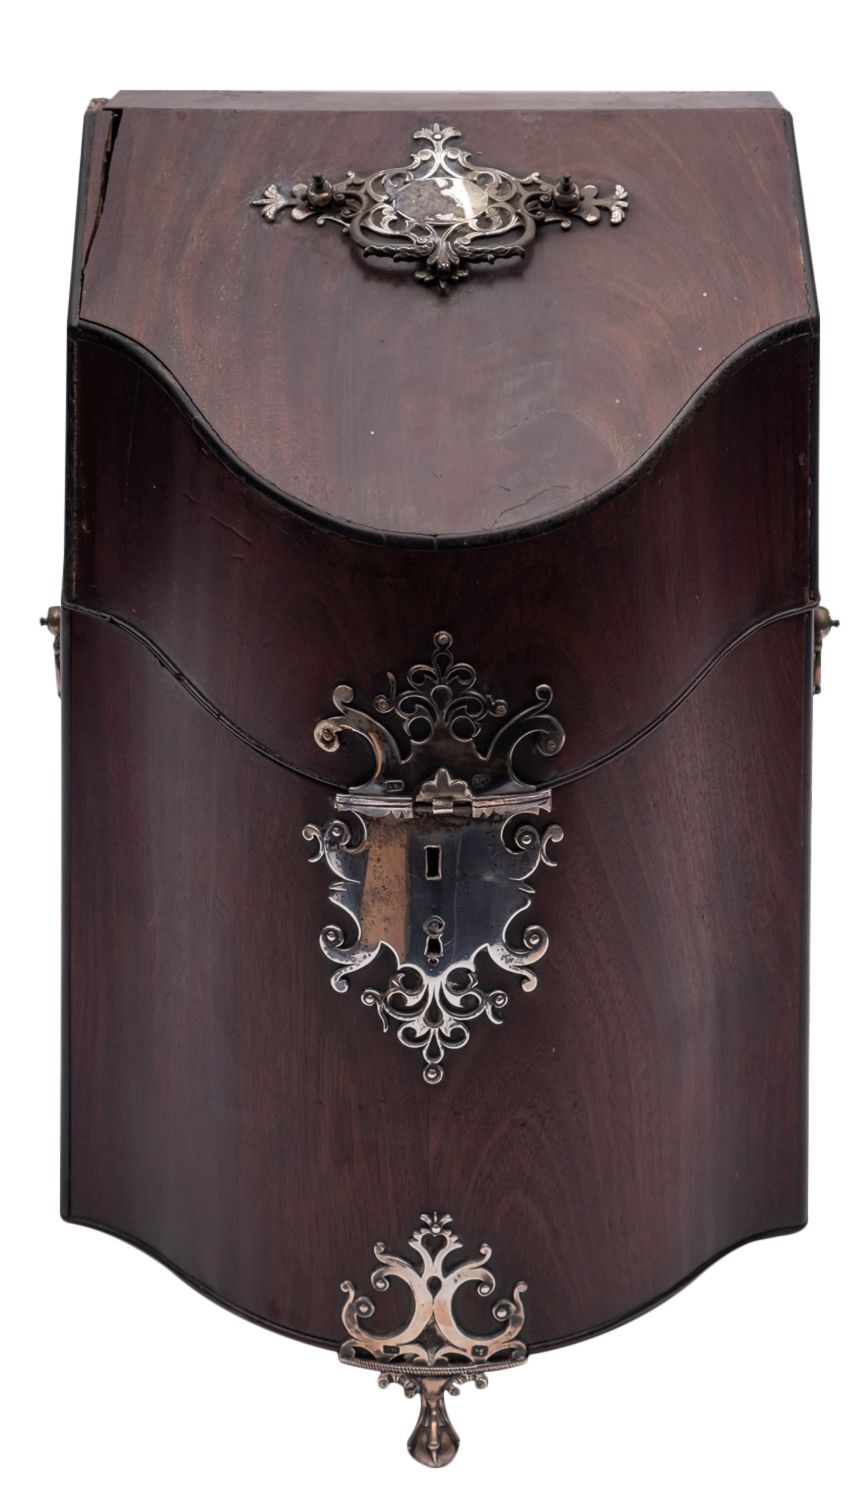 A George III mahogany serpentine fronted knife box with silver handles, lock and feet,